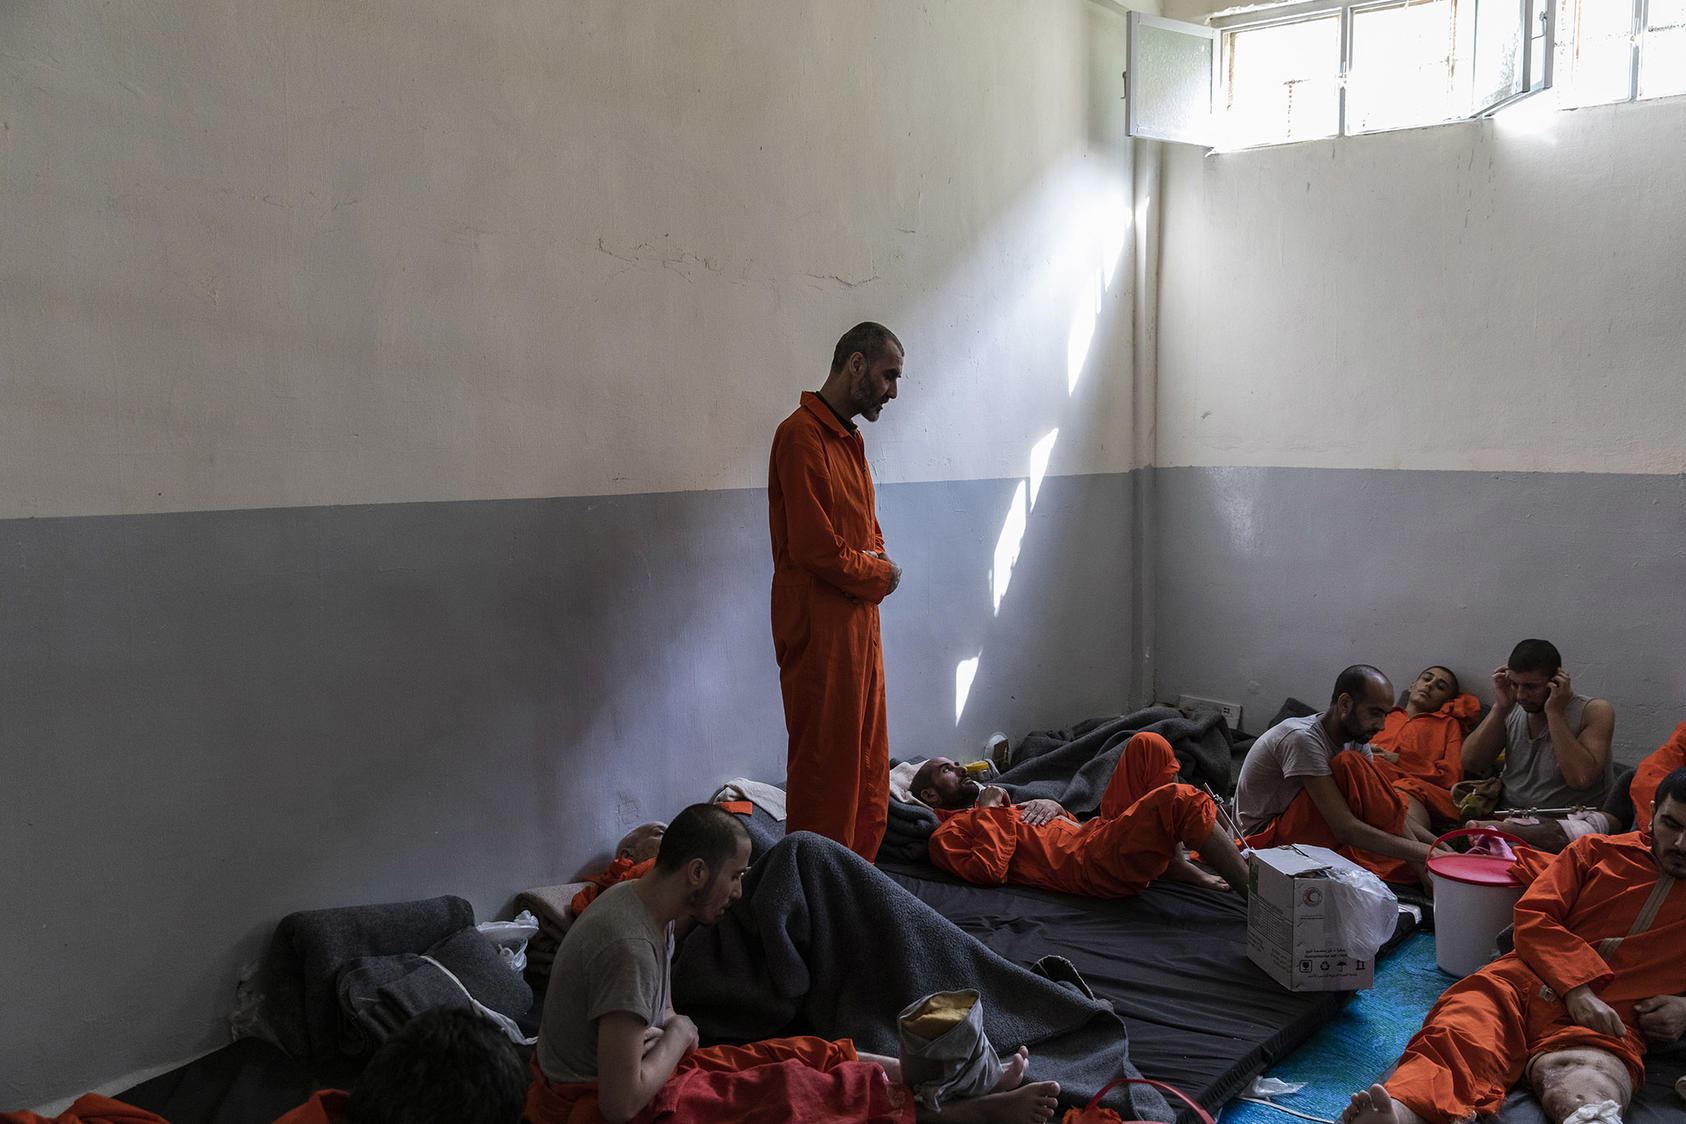 Suspected members of the Islamic State in a prison run by Kurdish-led forces in Syria, Oct. 22, 2019. (Ivor Prickett/The New York Times)